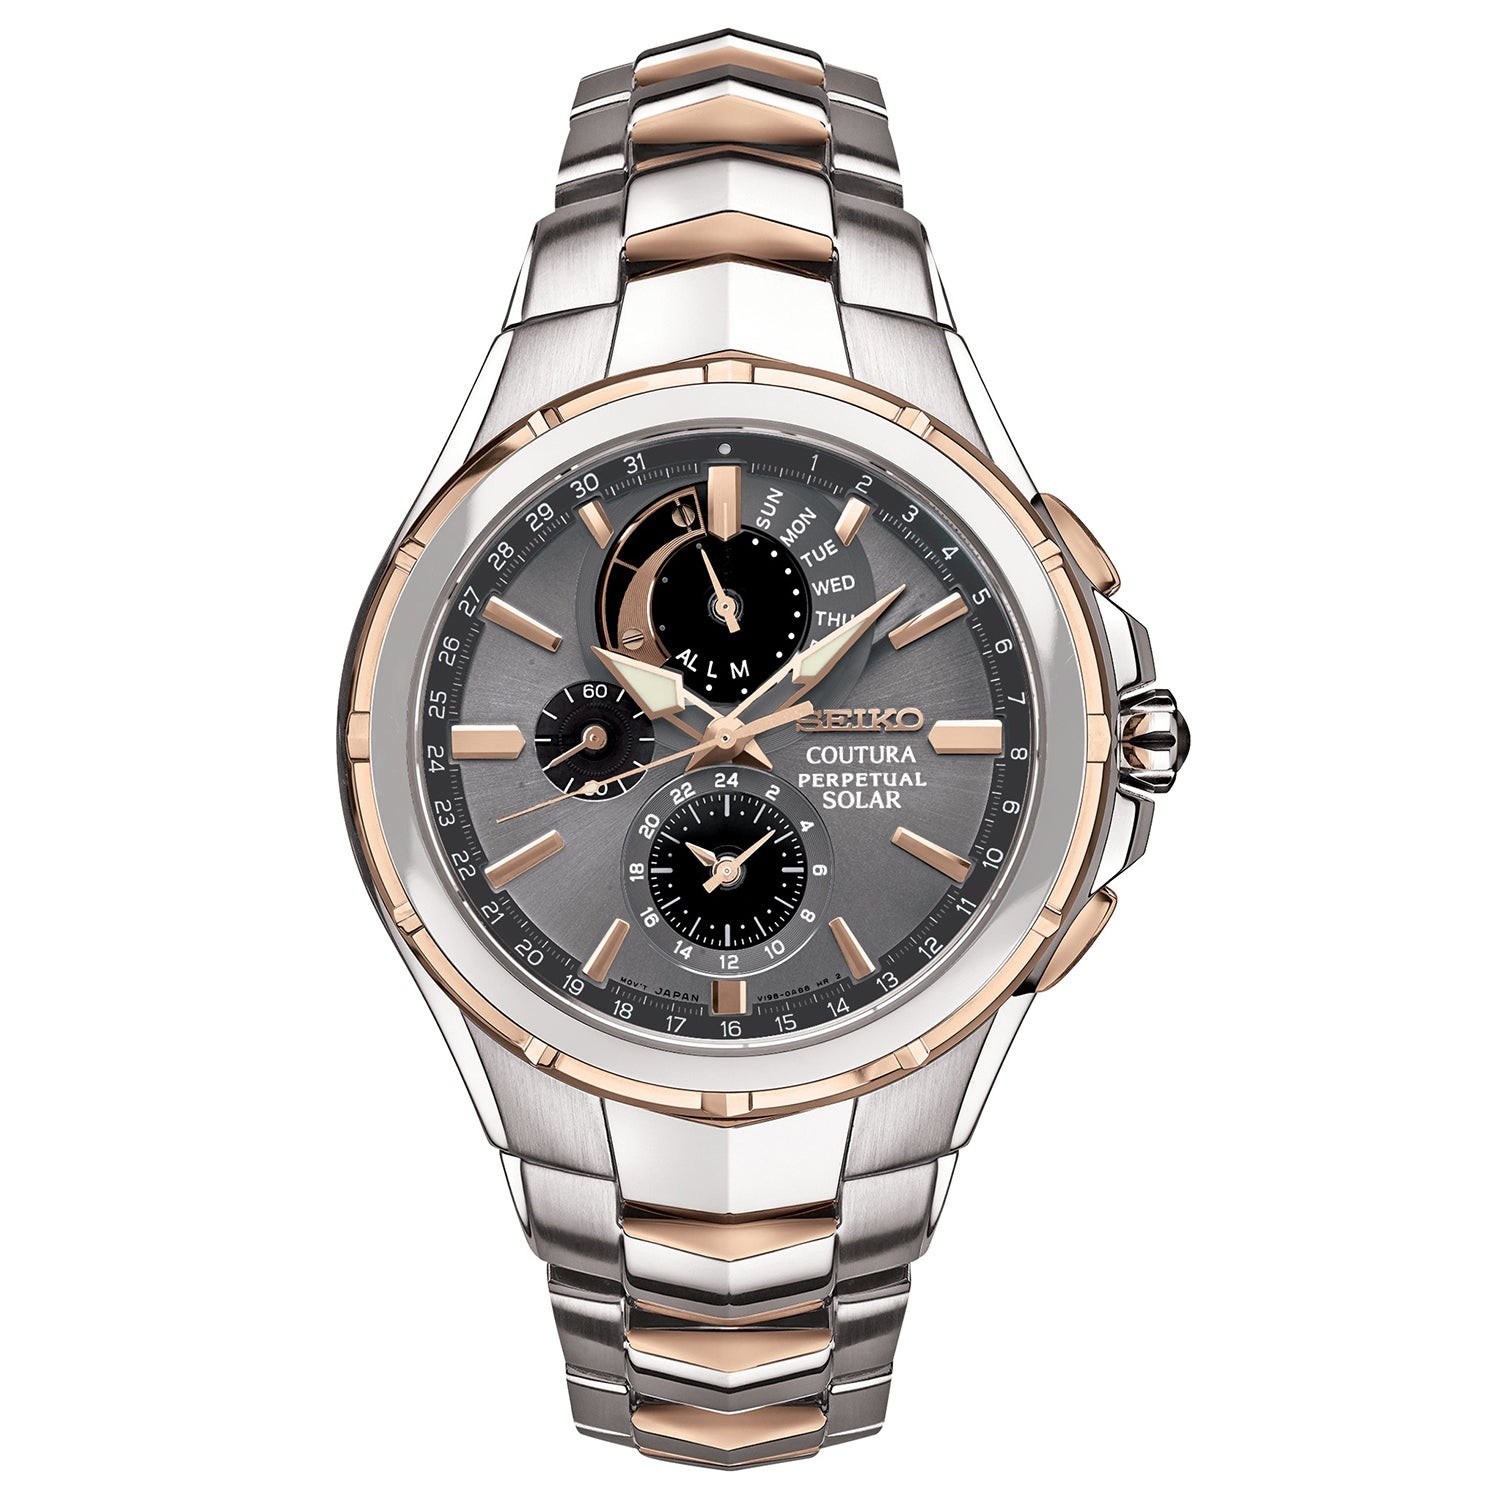 Mens Coutura Solar Perpetual Chronograph Two-Tone Watch Gray Dial